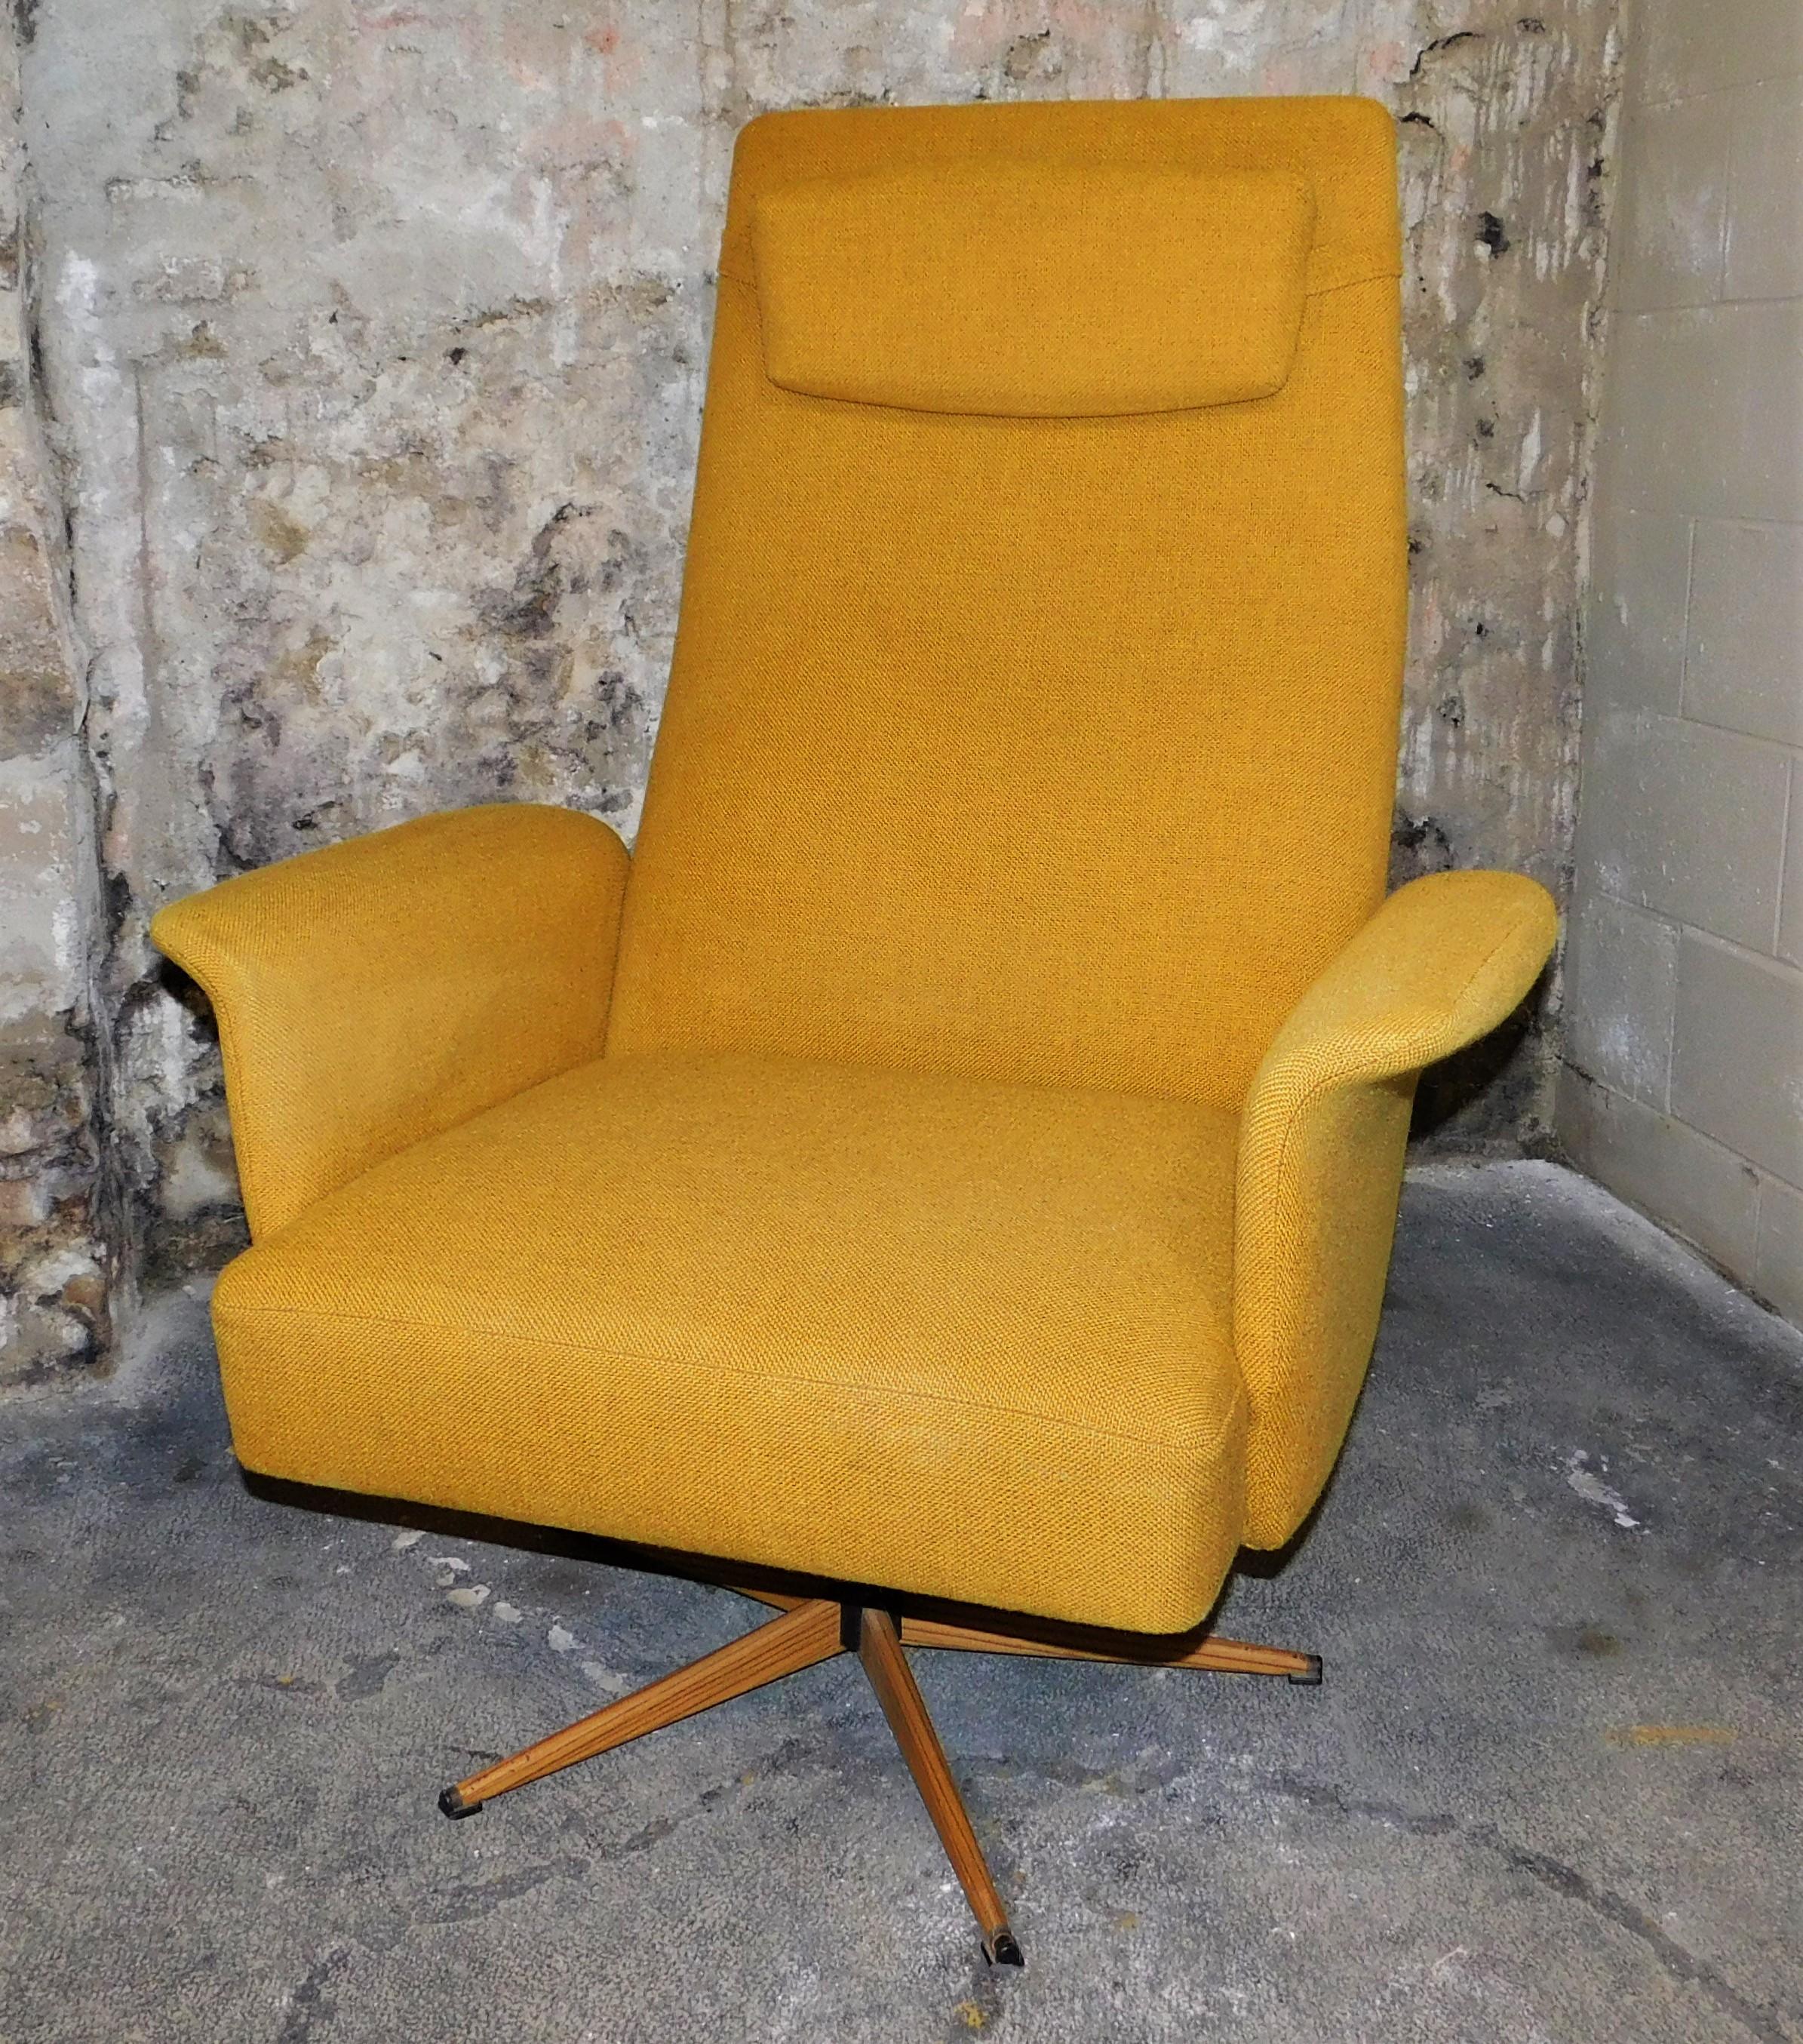 Mid-Century Modern Stokke Fabrikker adjustable lounge chair/armchair. Wing back arms, head cushion and seat adjustment lever control which will lock seat into place. Vibrant yellow fabric.